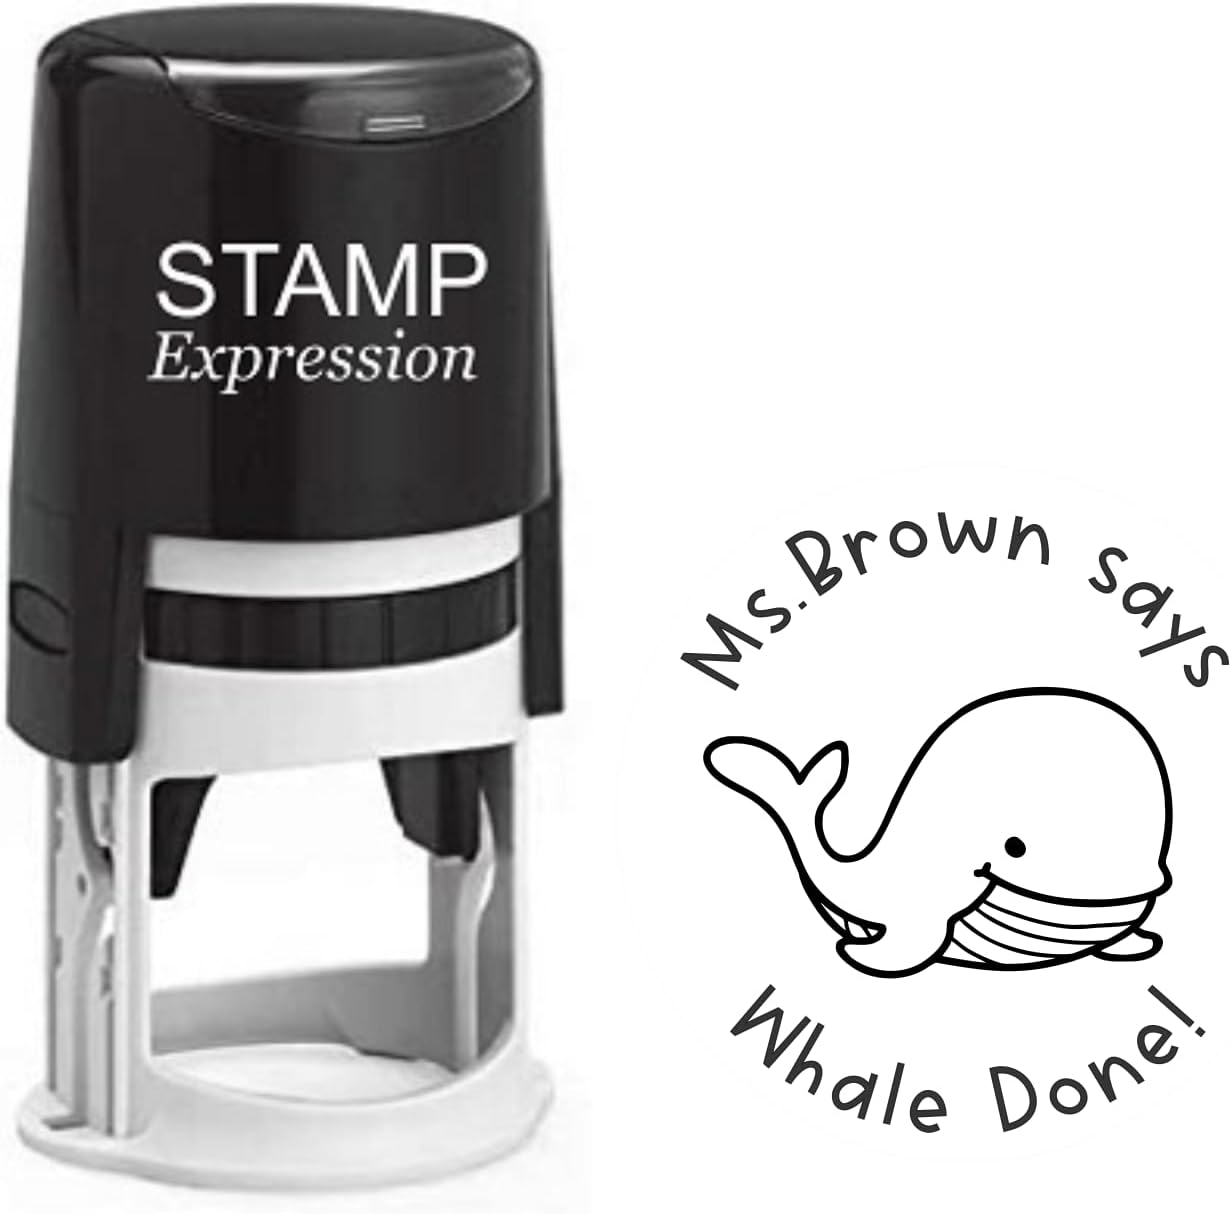 Whale Done Teacher Custom Stamp - Self Inking. Personalized Rubber Stamp with Lines of Text (SH-76214)